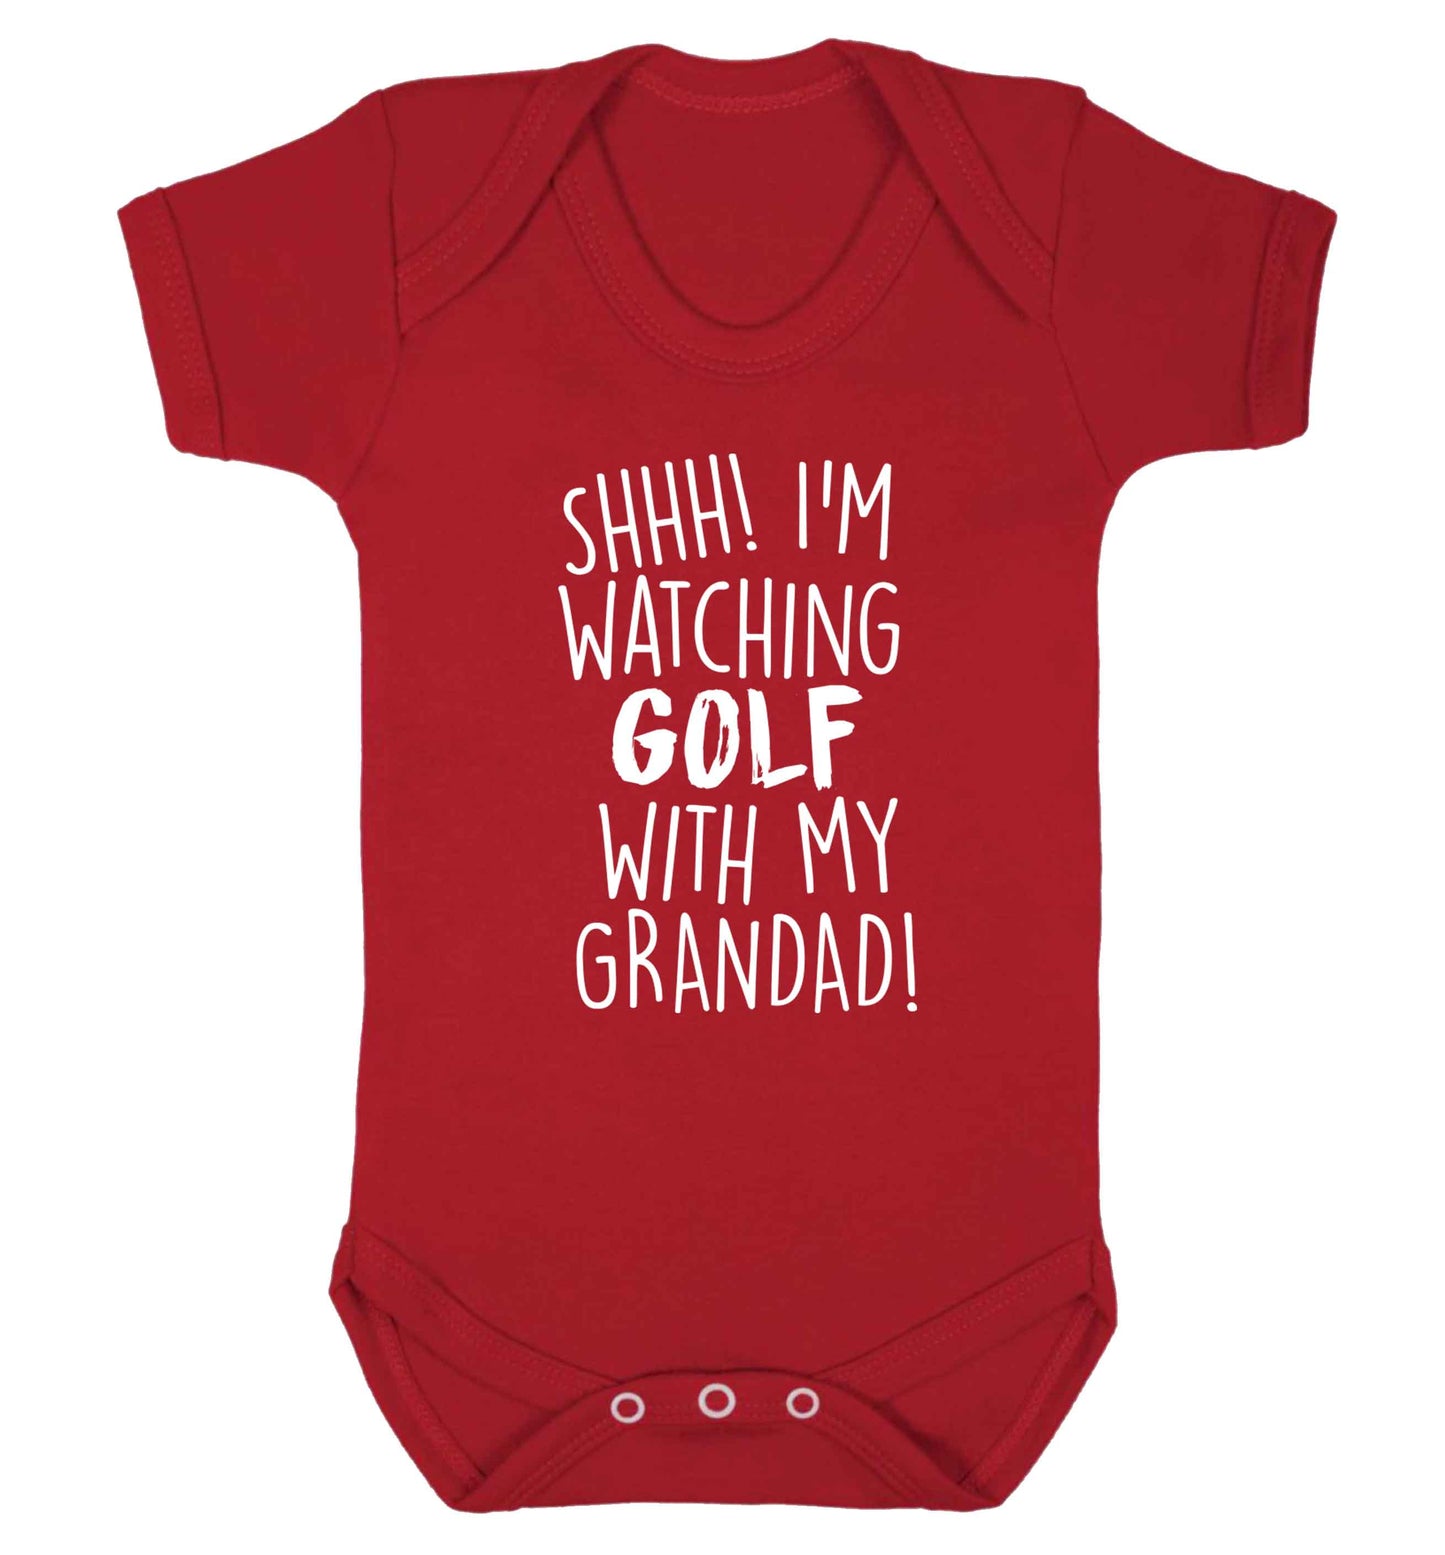 Shh I'm watching golf with my grandad Baby Vest red 18-24 months